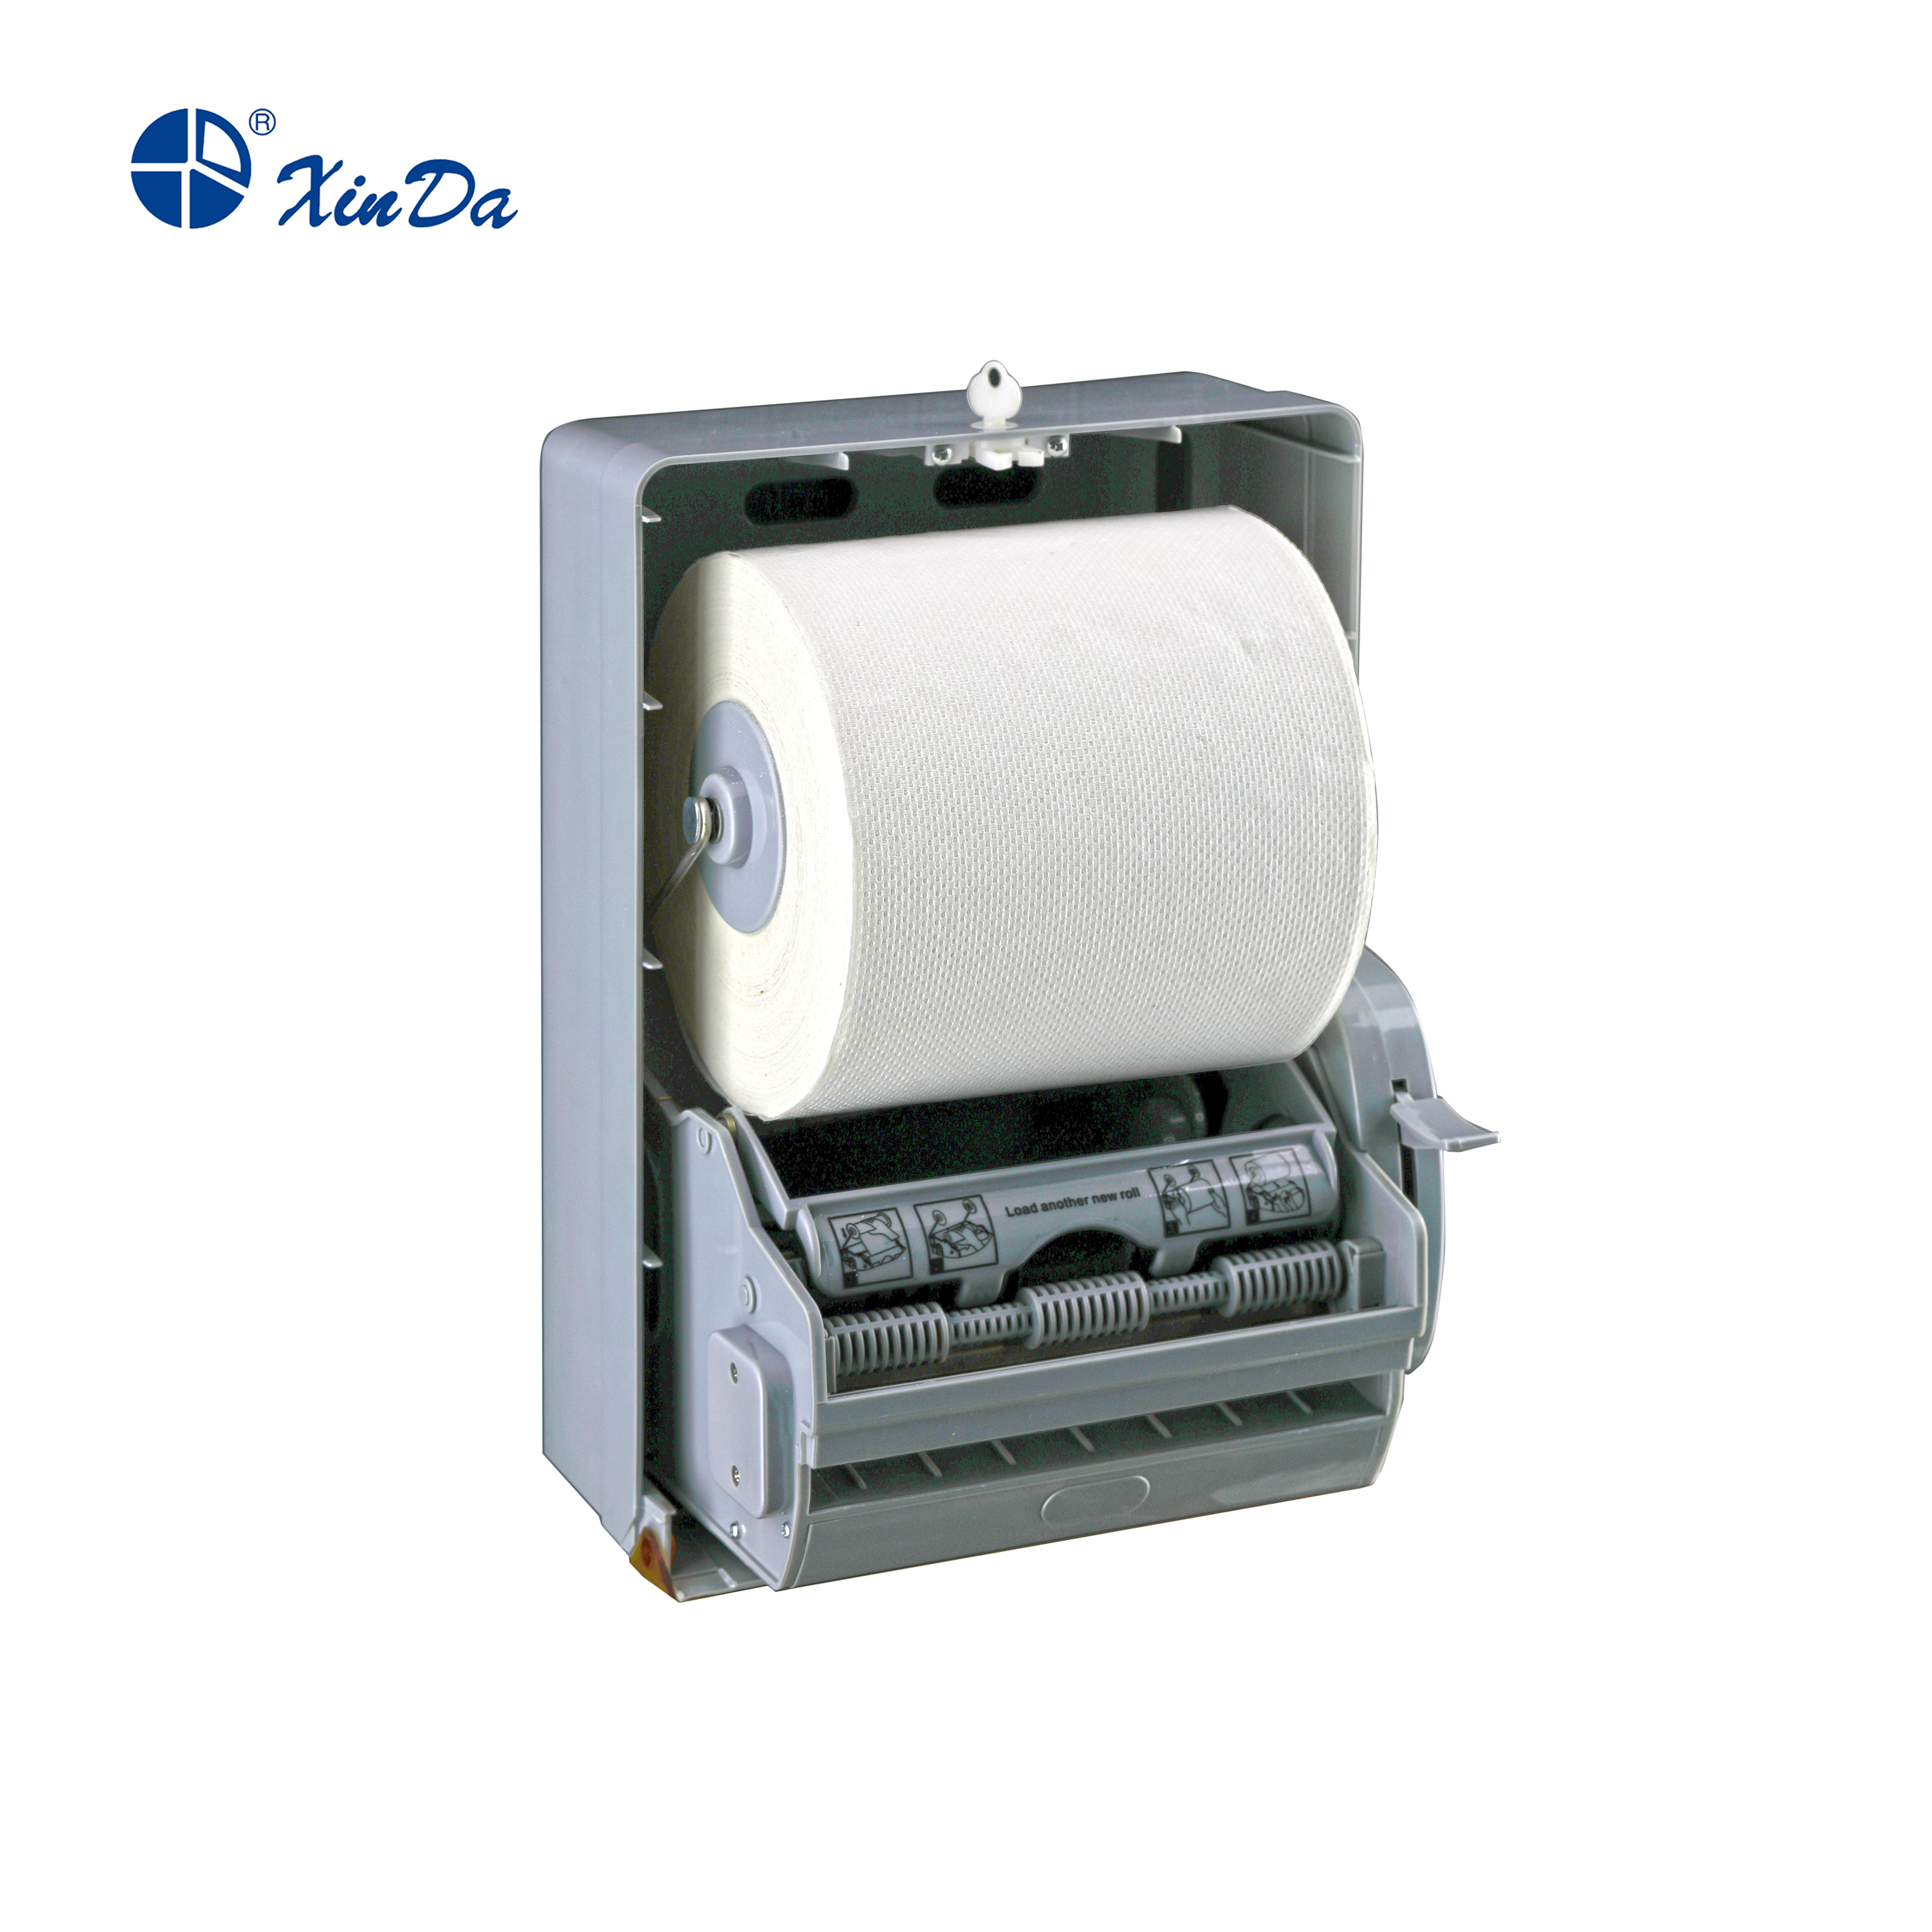 Things to Look For in a Paper Towel Roll Dispenser